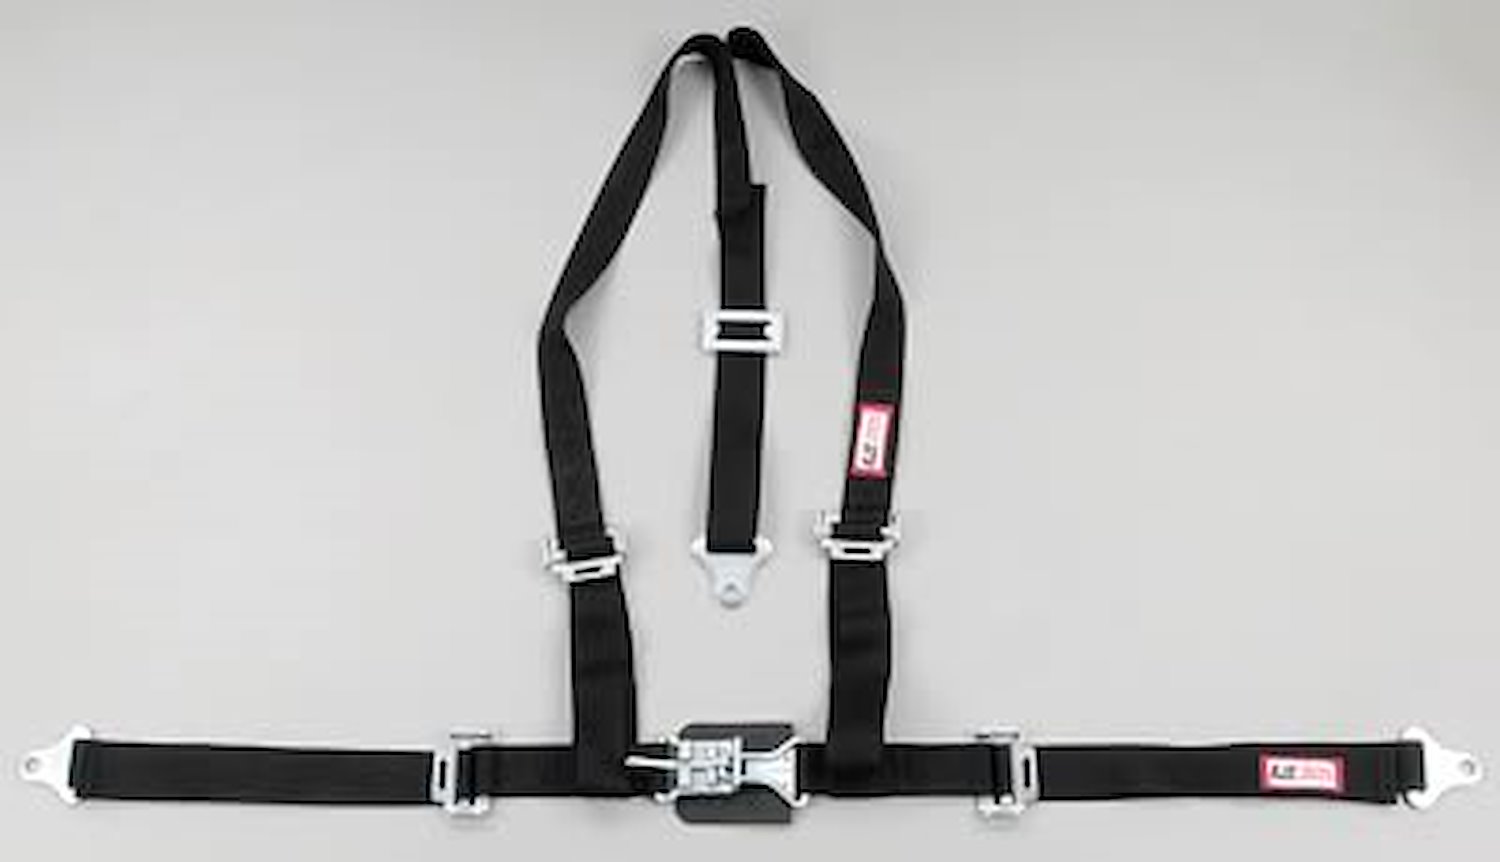 NON-SFI L&L HARNESS 2 PULL UP Lap Belt w/Adjuster SNAP 2 S.H. Individual ROLL BAR MOUNT w/STERNUM STRAP WRAP/BOLT RED